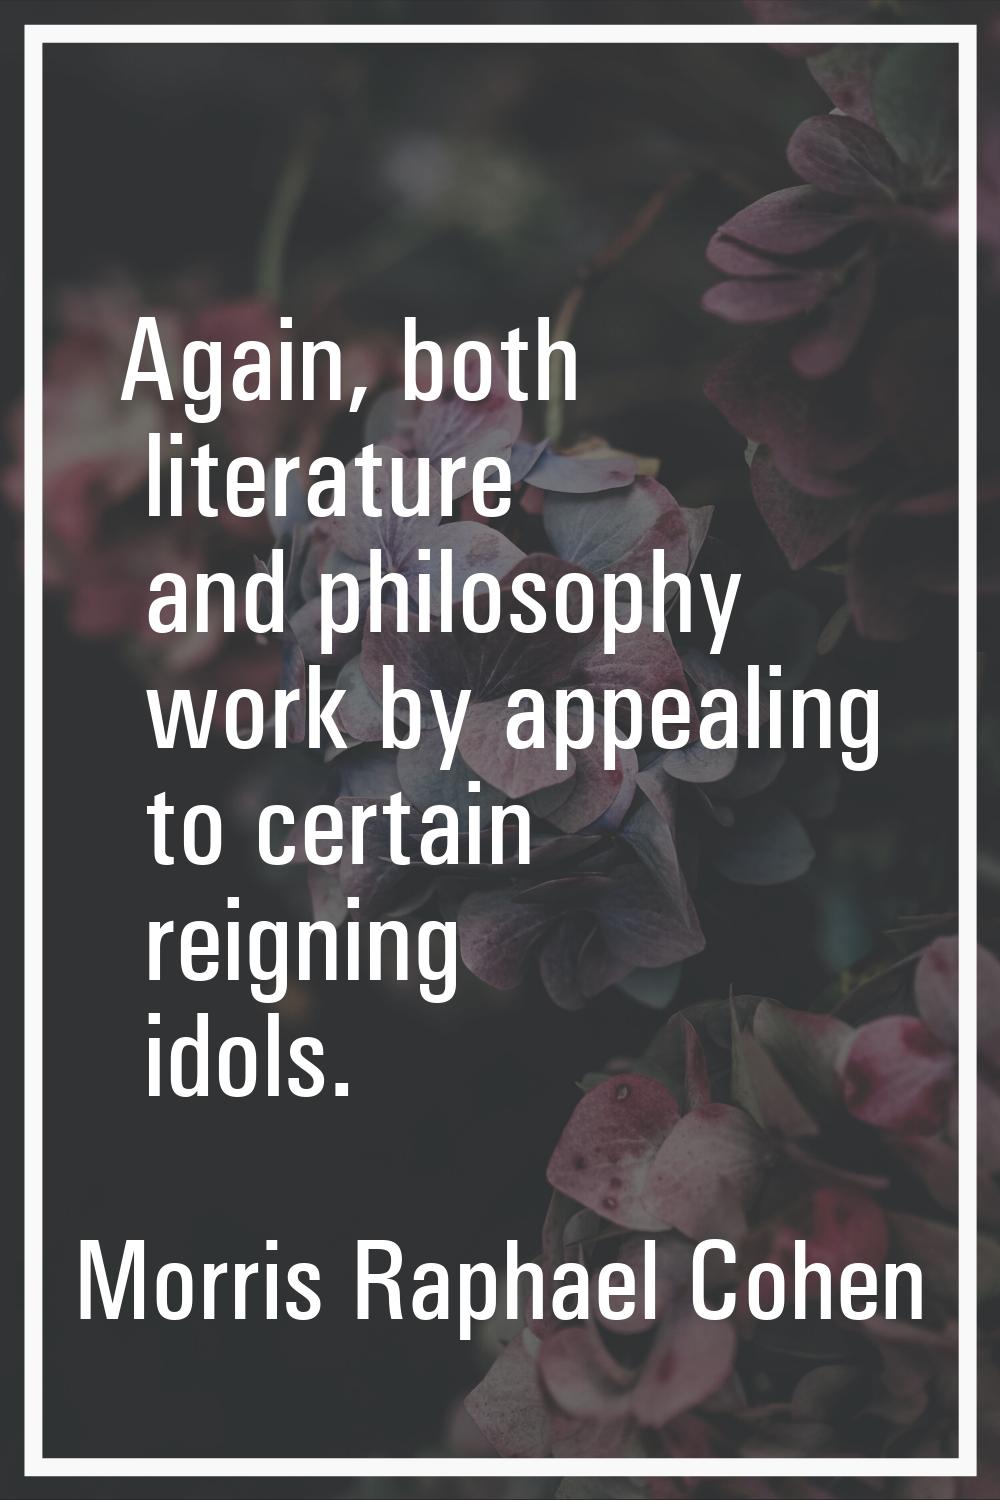 Again, both literature and philosophy work by appealing to certain reigning idols.